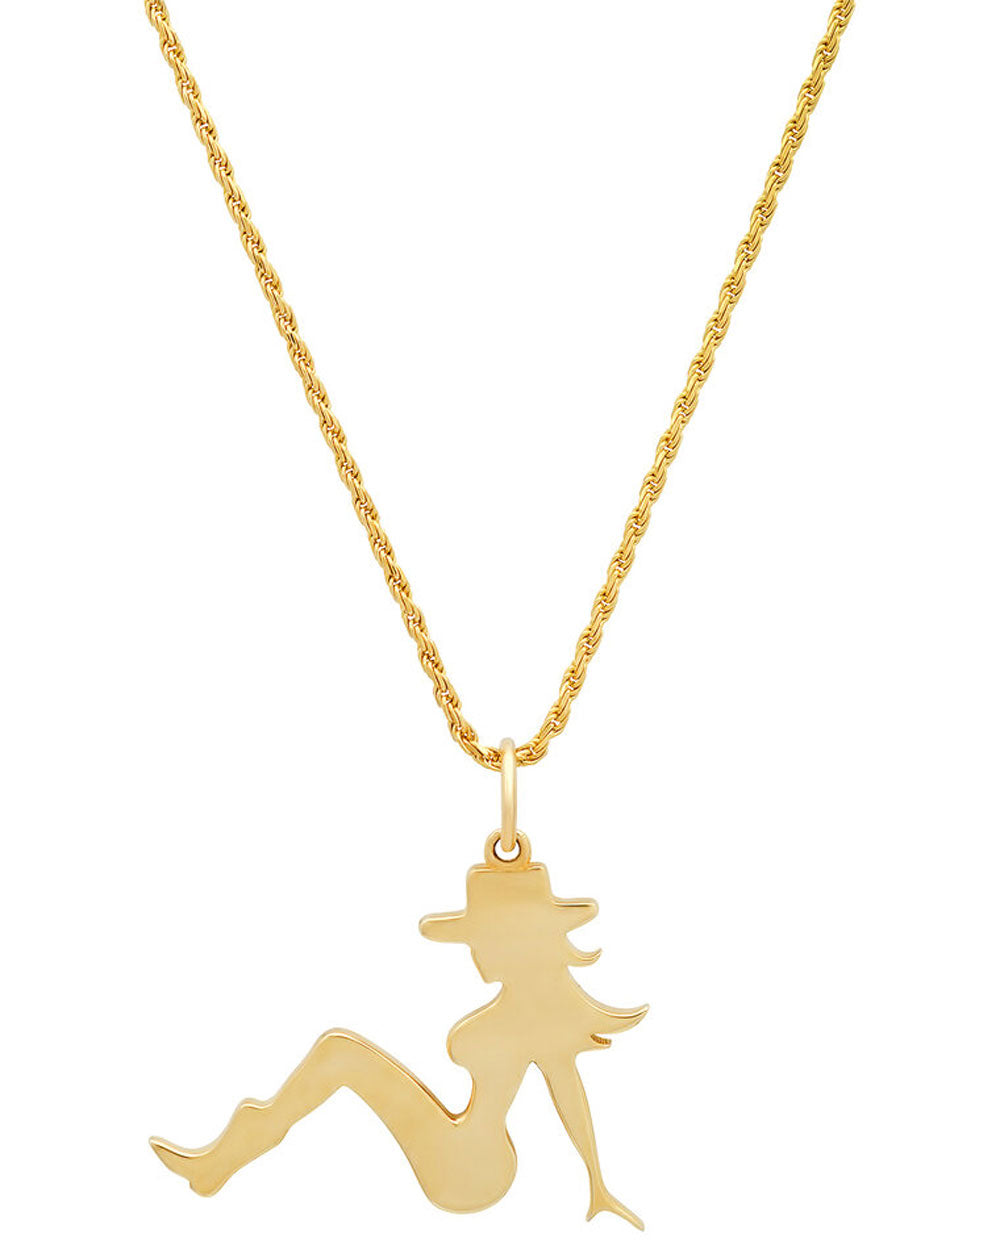 Cowgirl Silhouette Pendant Necklace